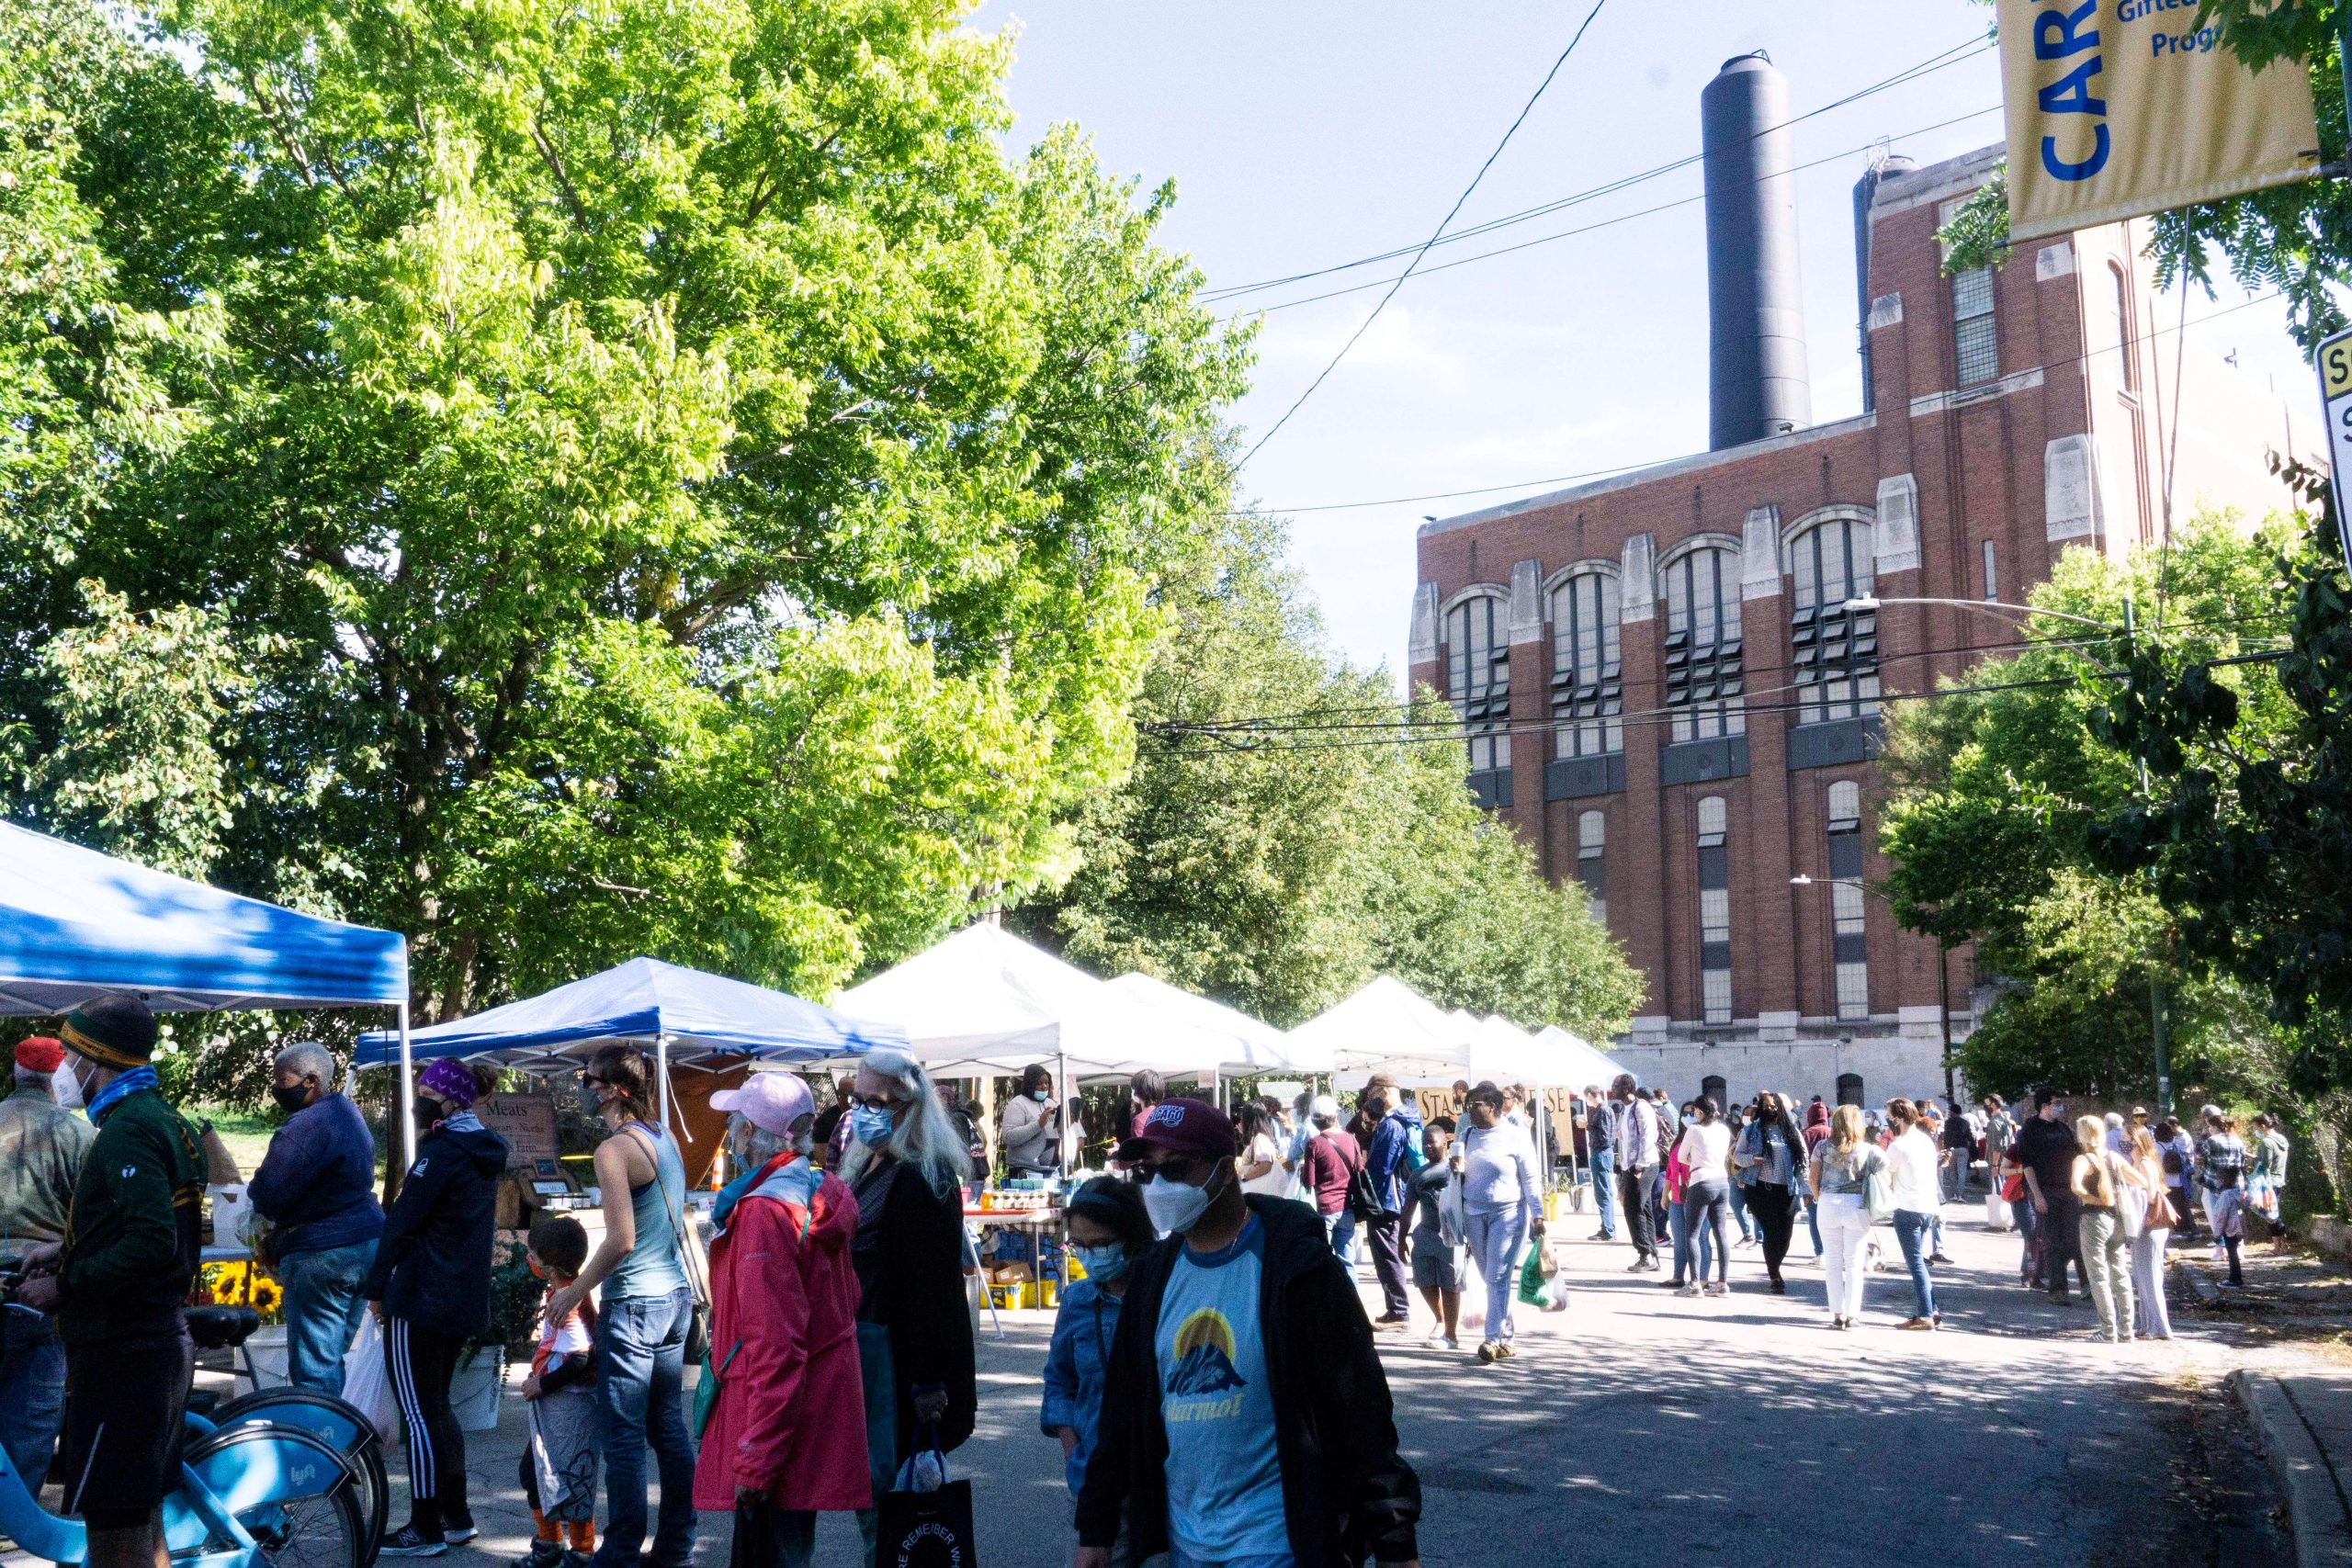 Several people in the foreground browse blue and white vendor tents at and outdoor farmers market. It is sunny and the sky is blue. In the background, there are trees and a large brown building.